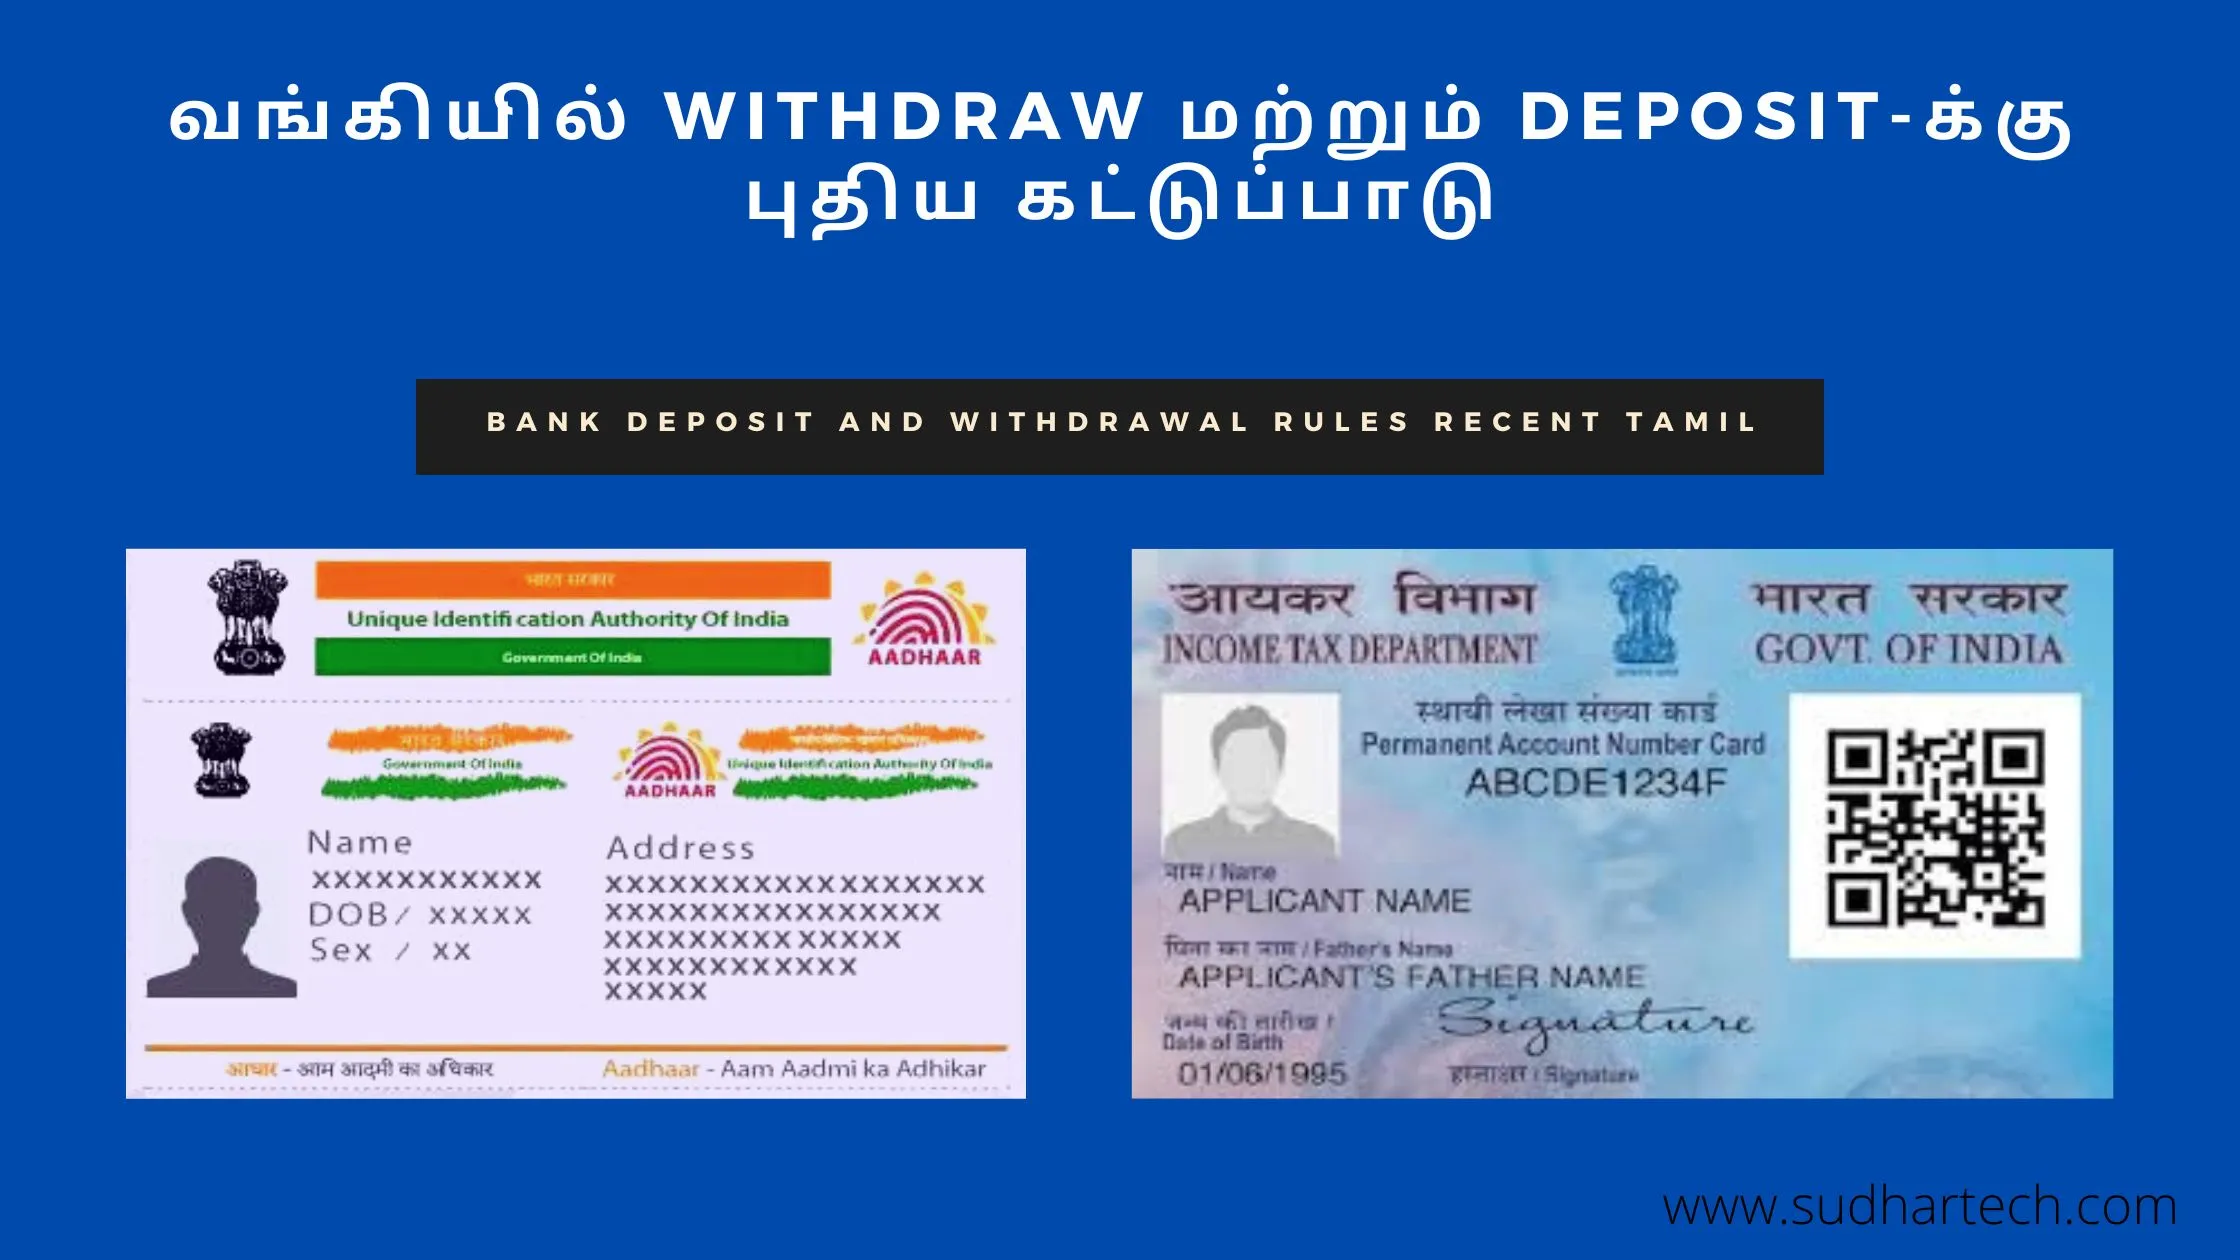 Bank deposit and withdrawal rules recent Tamil